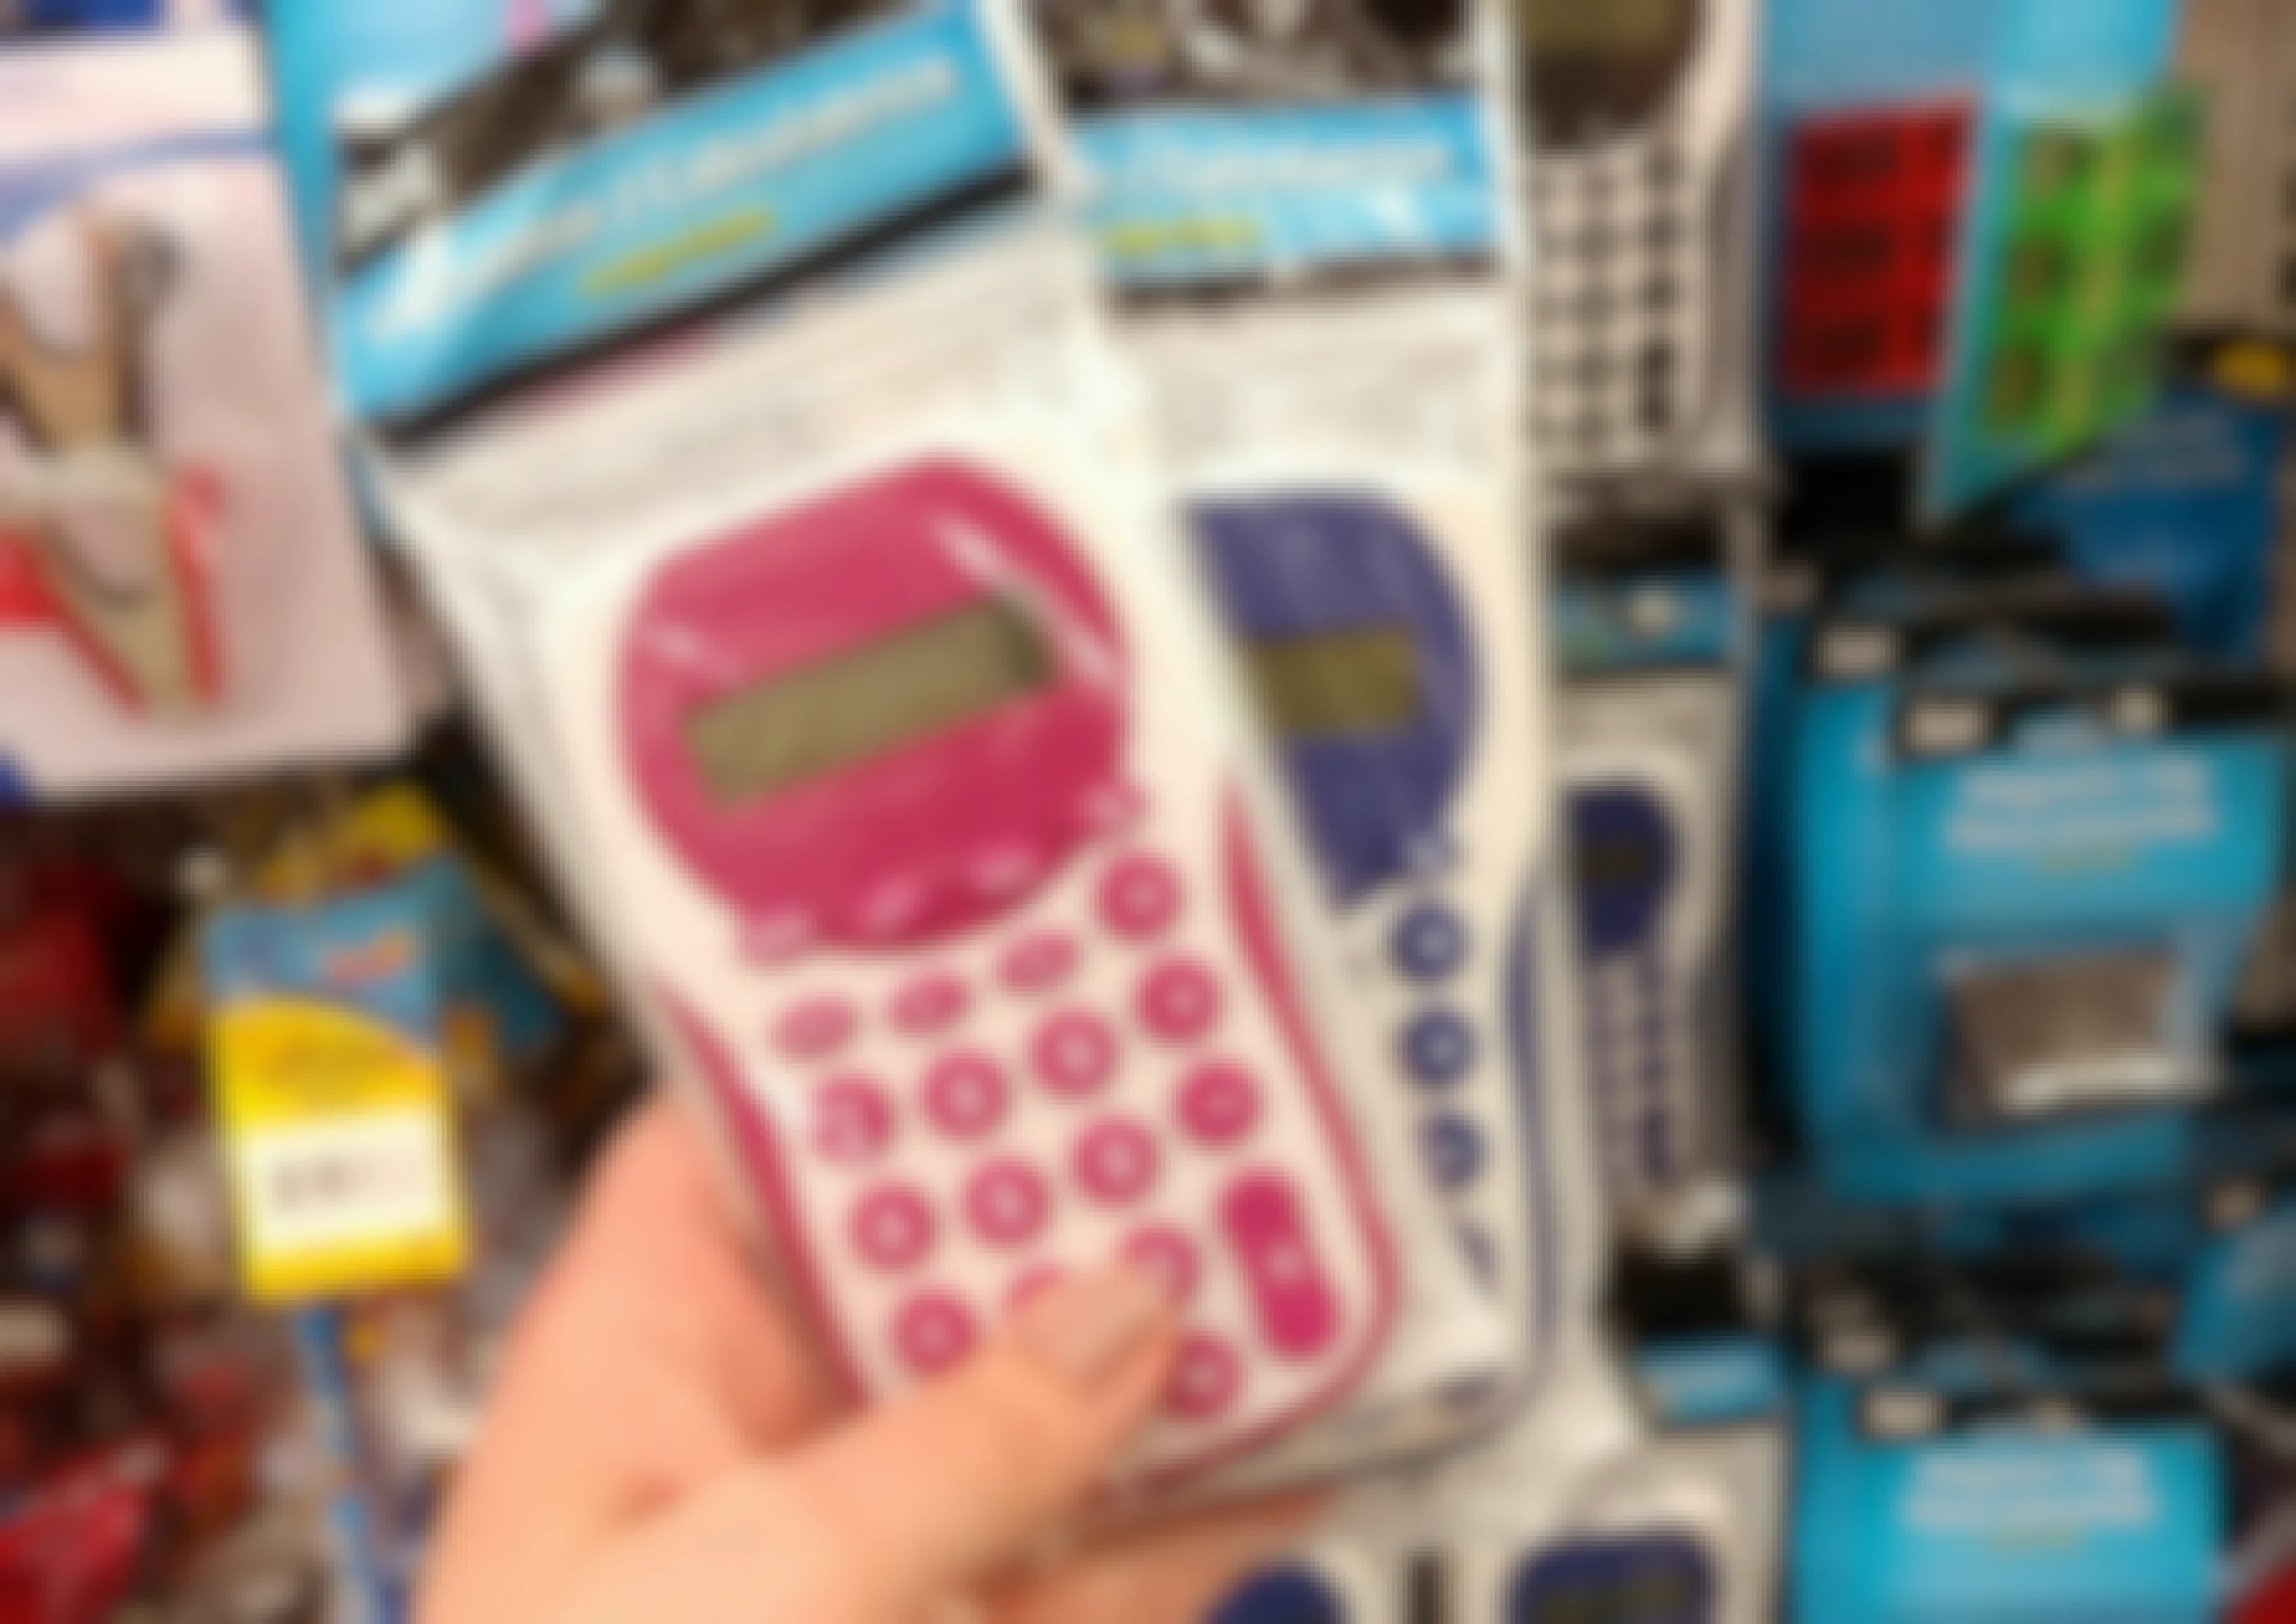 A person's hand holding up two calculators in front of a display of calculators for sale at Dollar Tree.